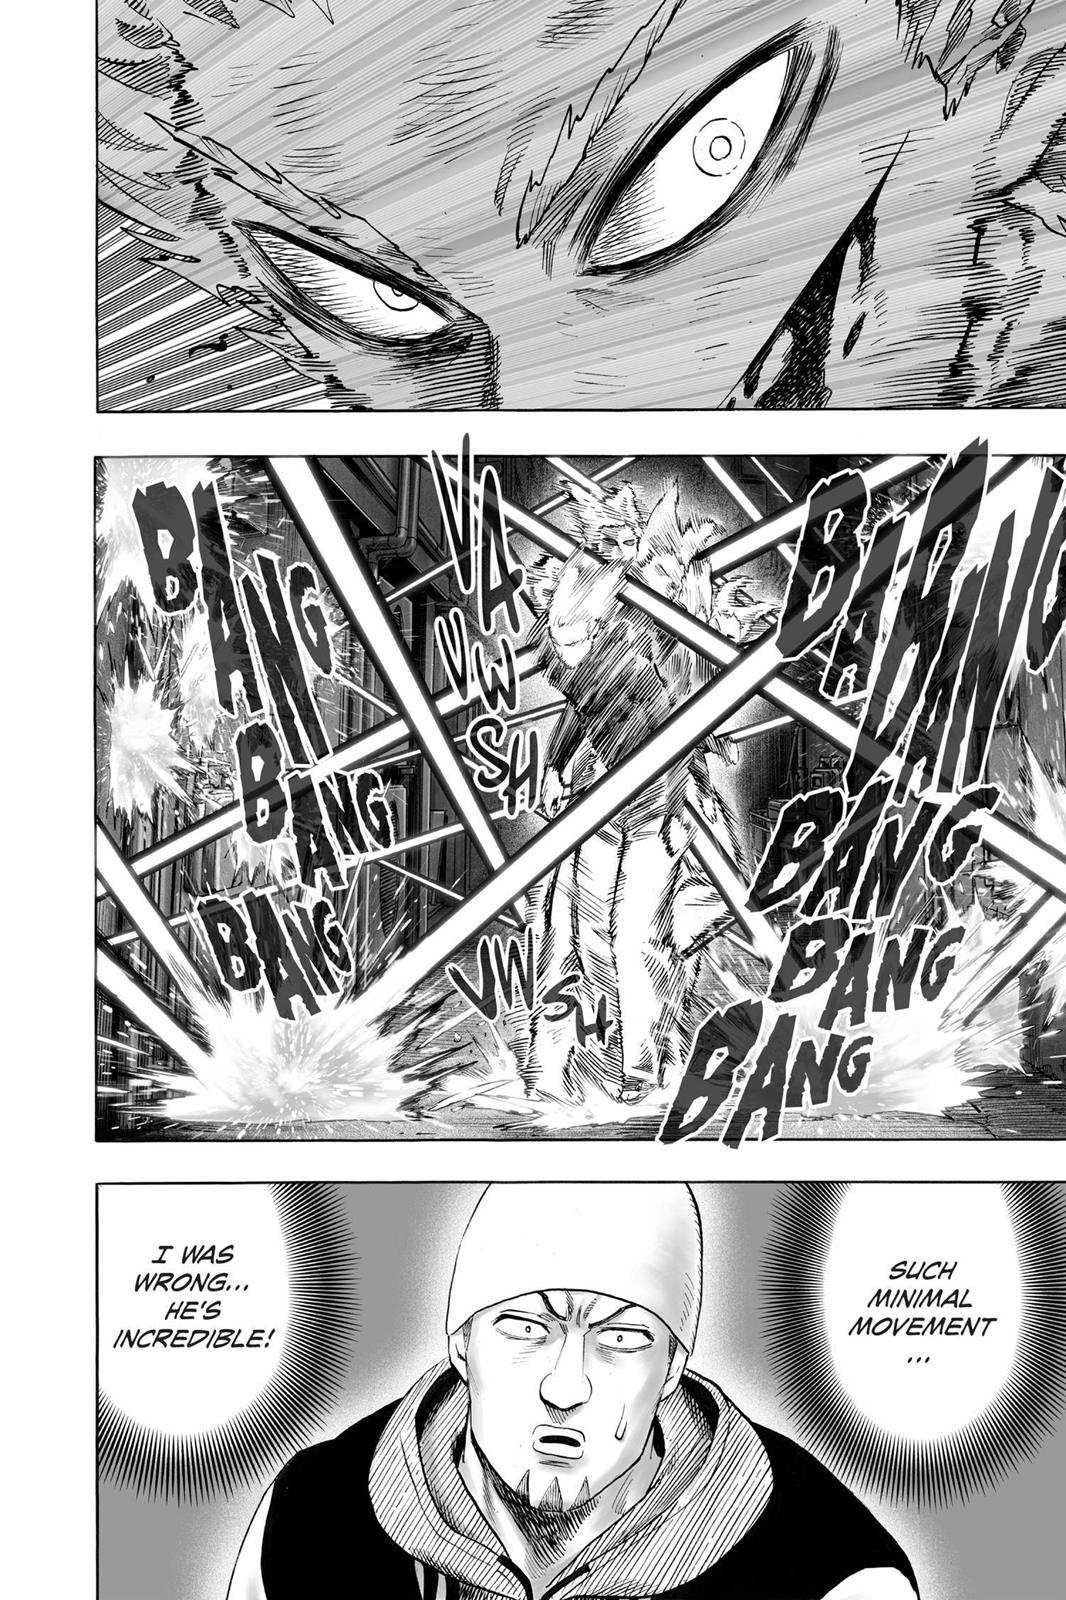 One-Punch Man, Punch 50 image 11